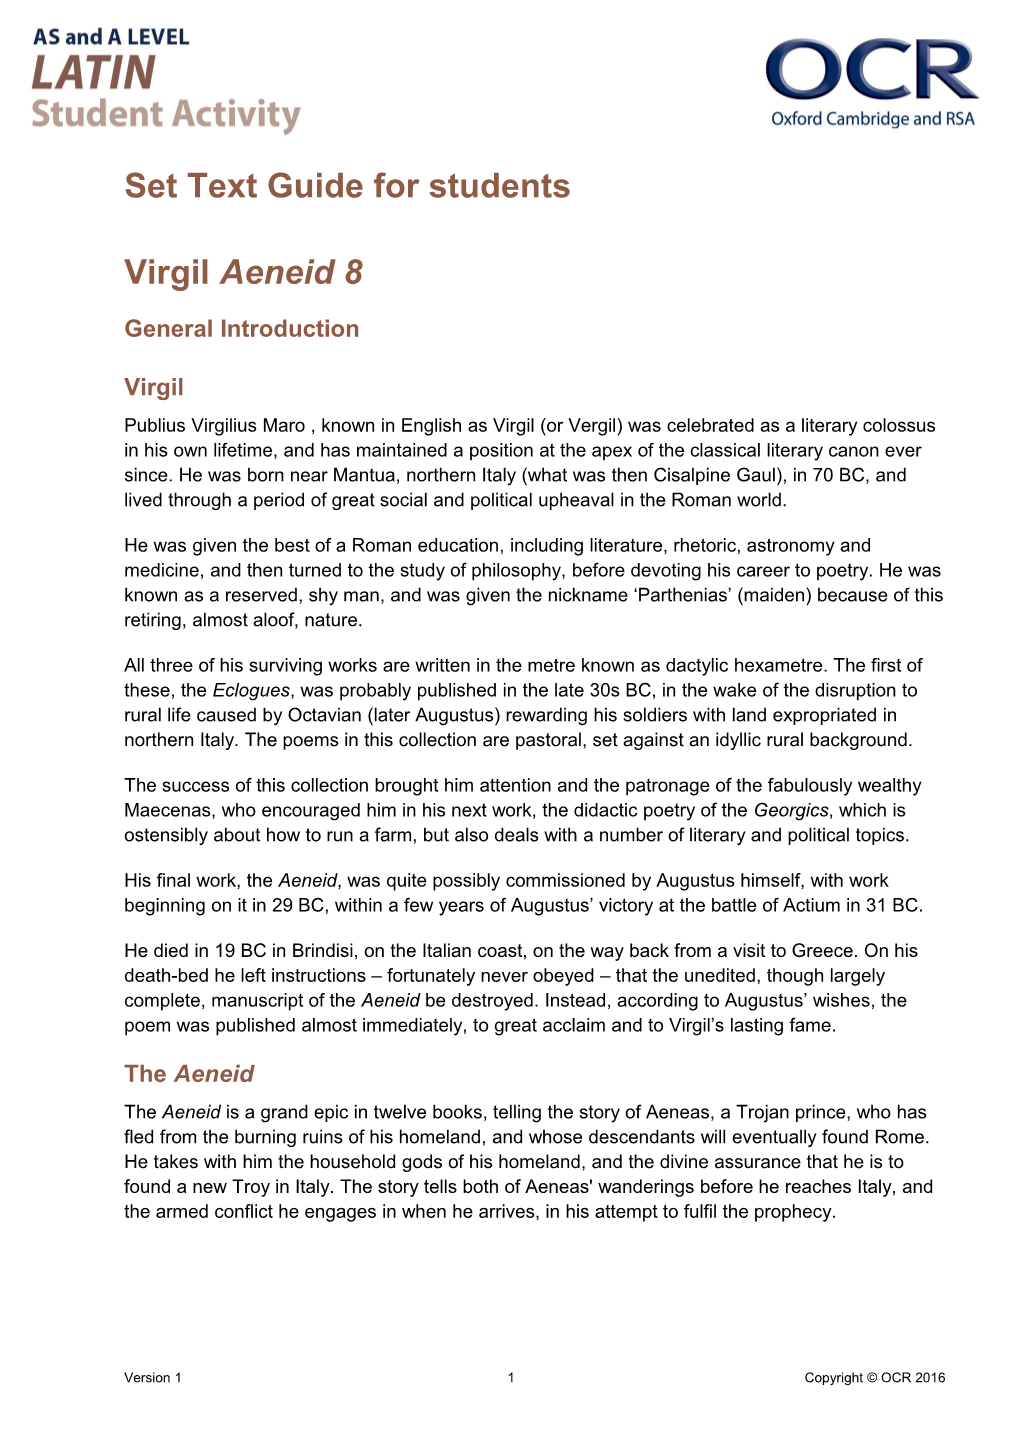 OCR AS and a Level Latin Set Text Guide - Virgil Aeneid 8